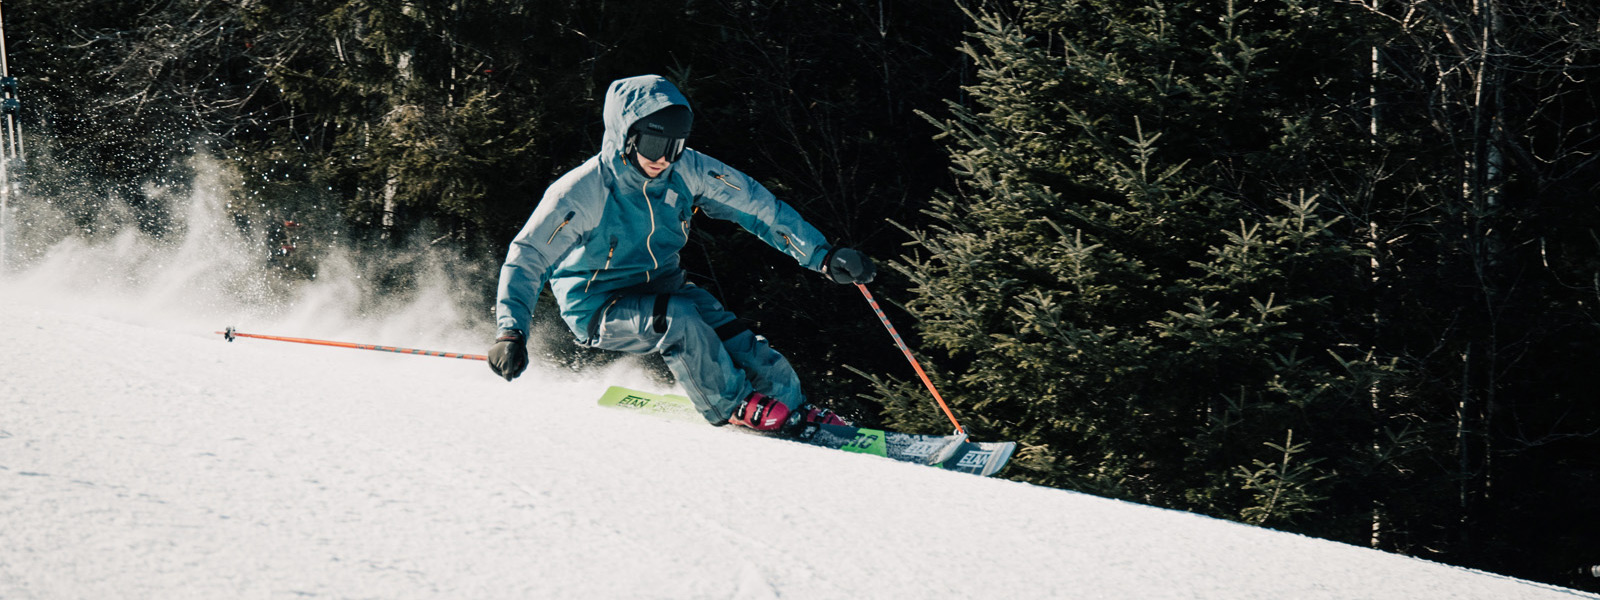 The Ski Monster, on snow, testing, Waterville valley, December 2019